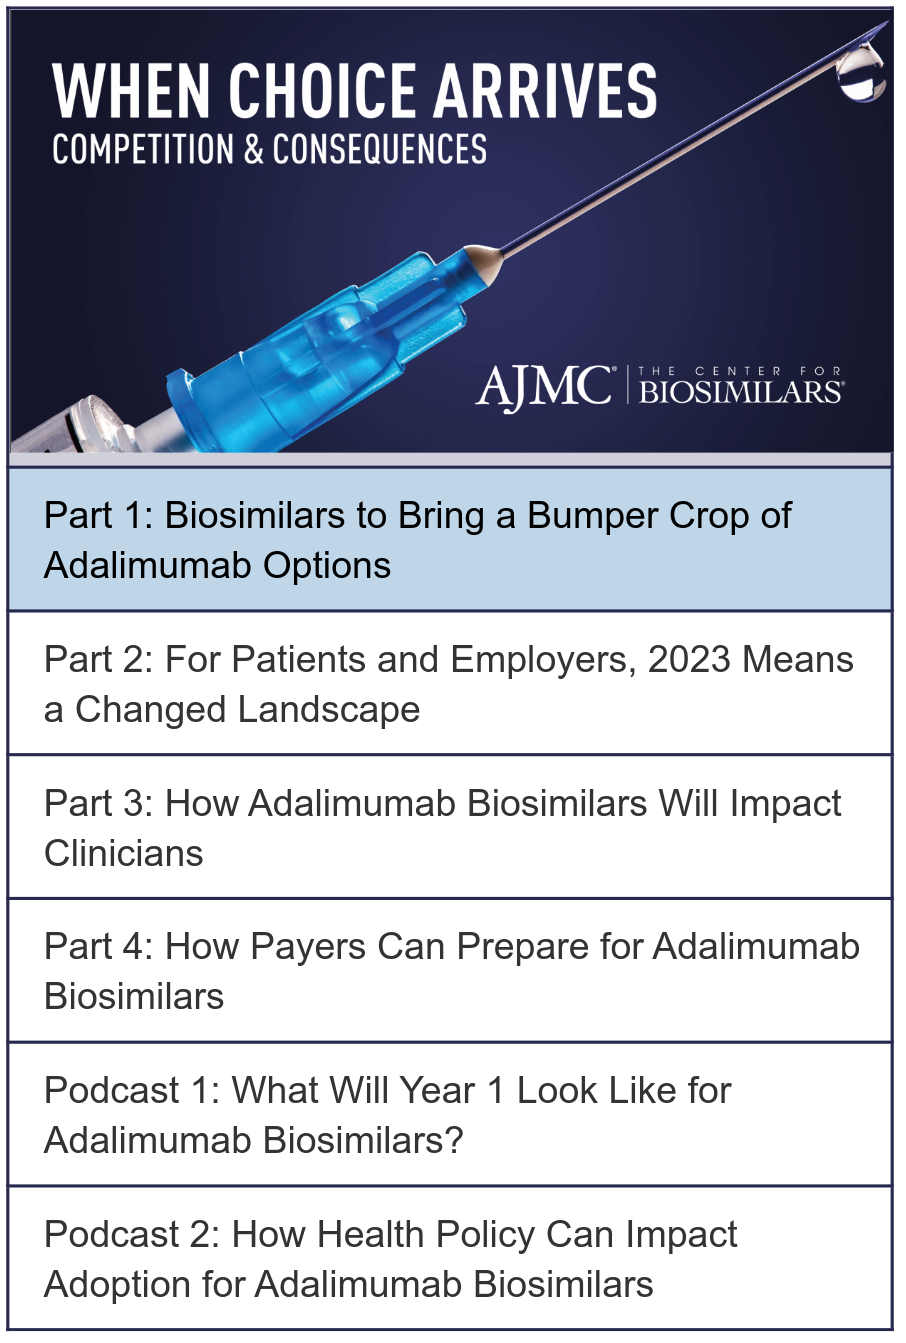 "When Choice Arrives: Competition & Consequences" written over a bright blue syringe with the AJMC/The Center for Biosimilars logo in the bottom right corner. Under the image is a list of 6 items (4 article titles and 2 podcasts). The first article item is highlighted.